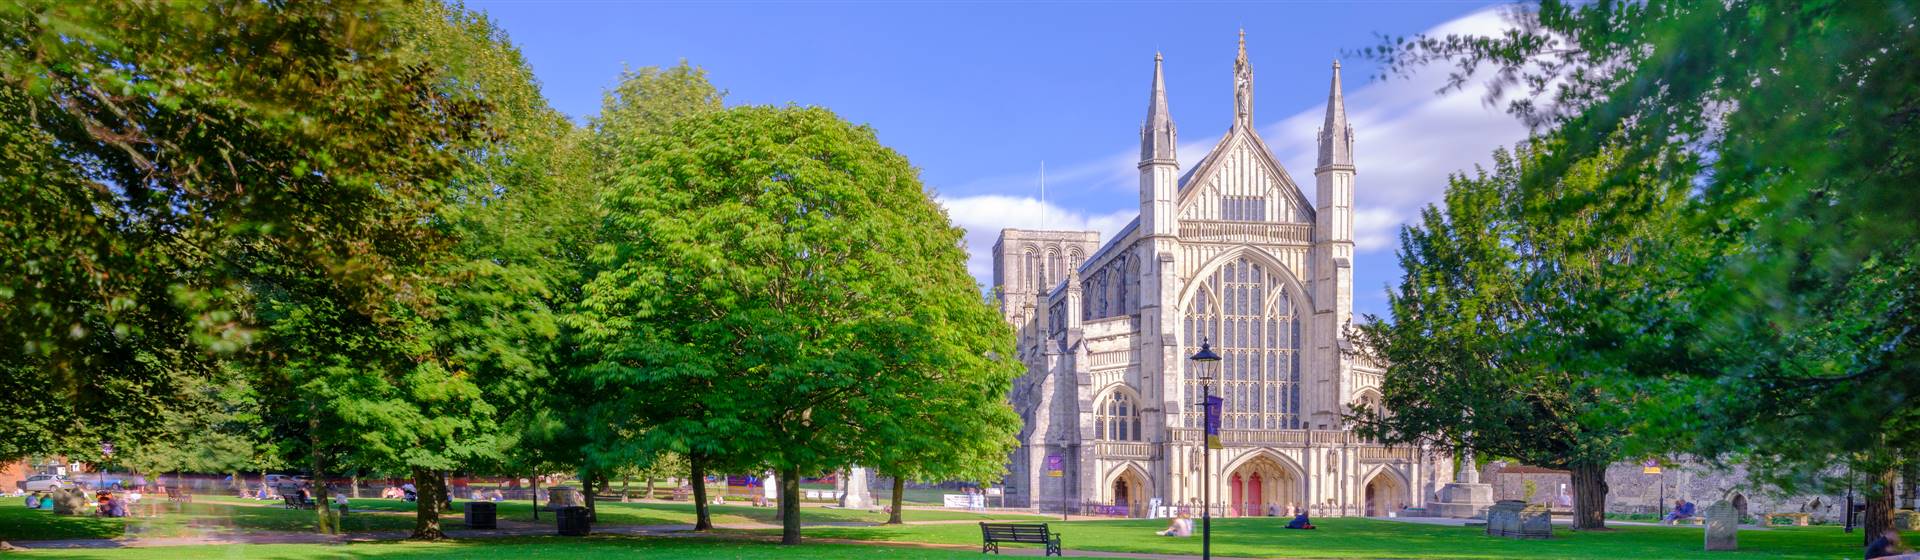 <img src="winchestercathedral2©adobestock.jpeg" alt="Winchester Cathedral"/>